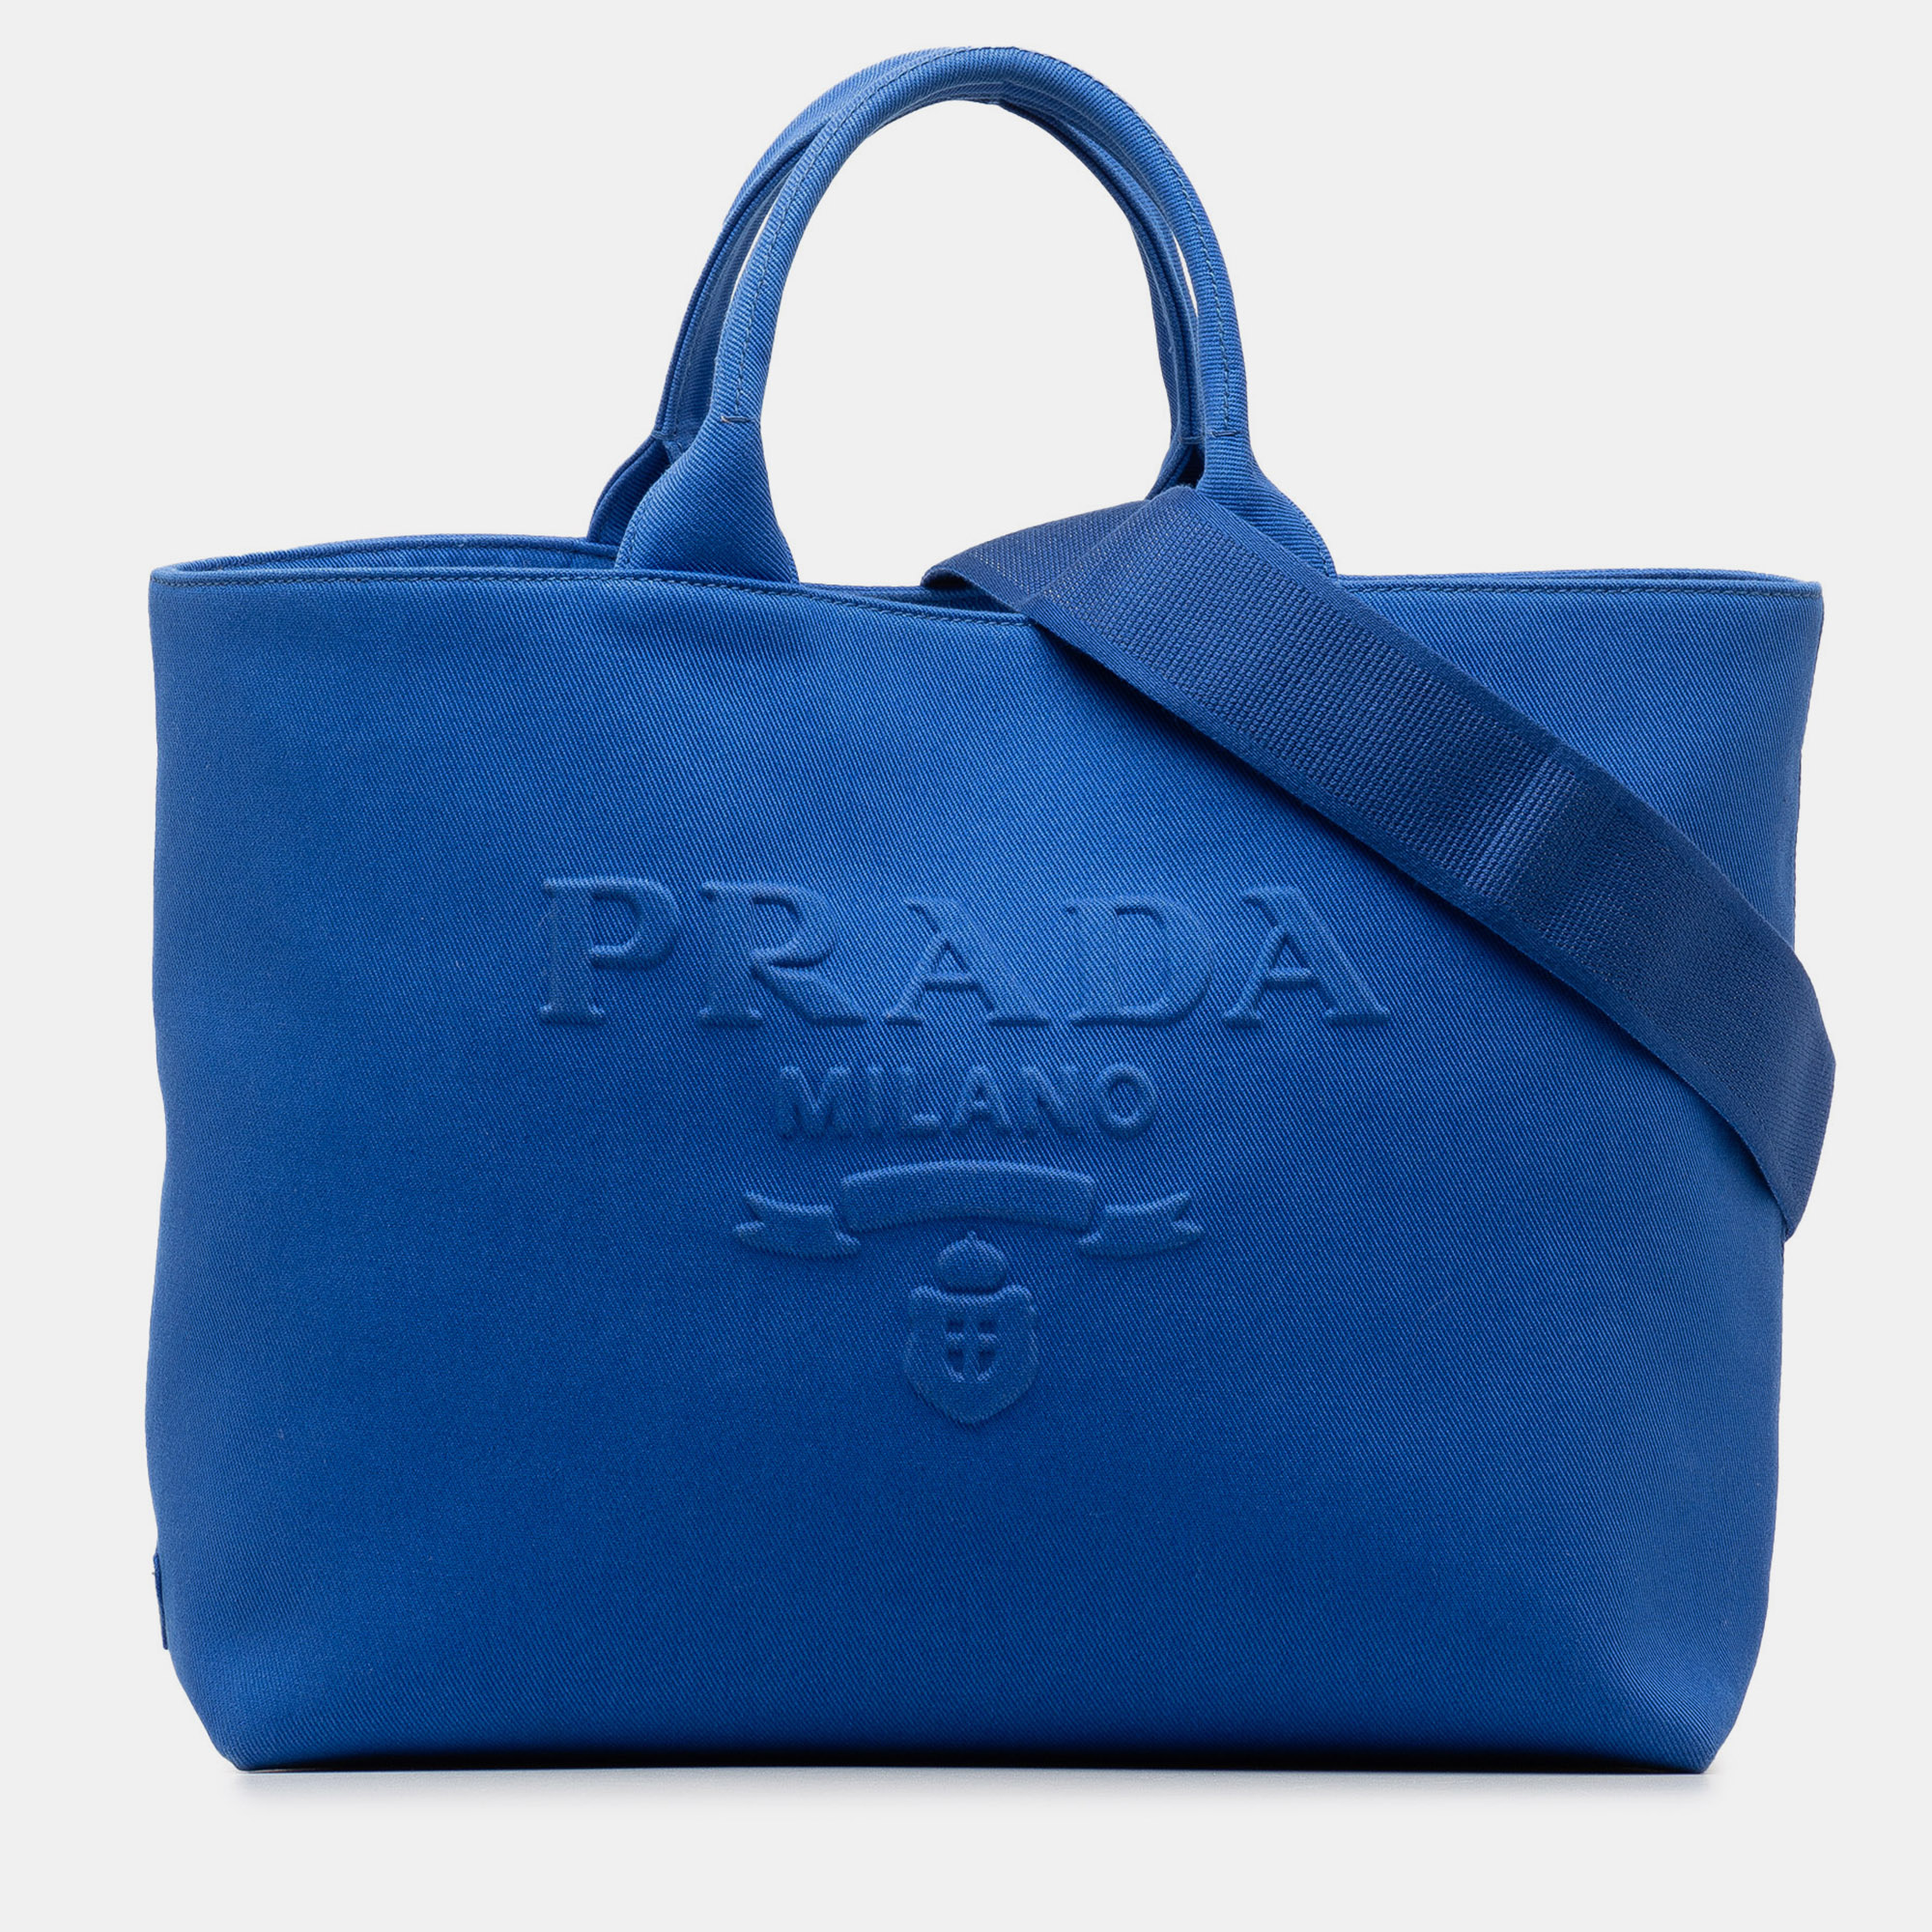 Experience luxury with this Prada bag. Meticulously crafted with the best materials its a timeless piece that will elevate any outfit.